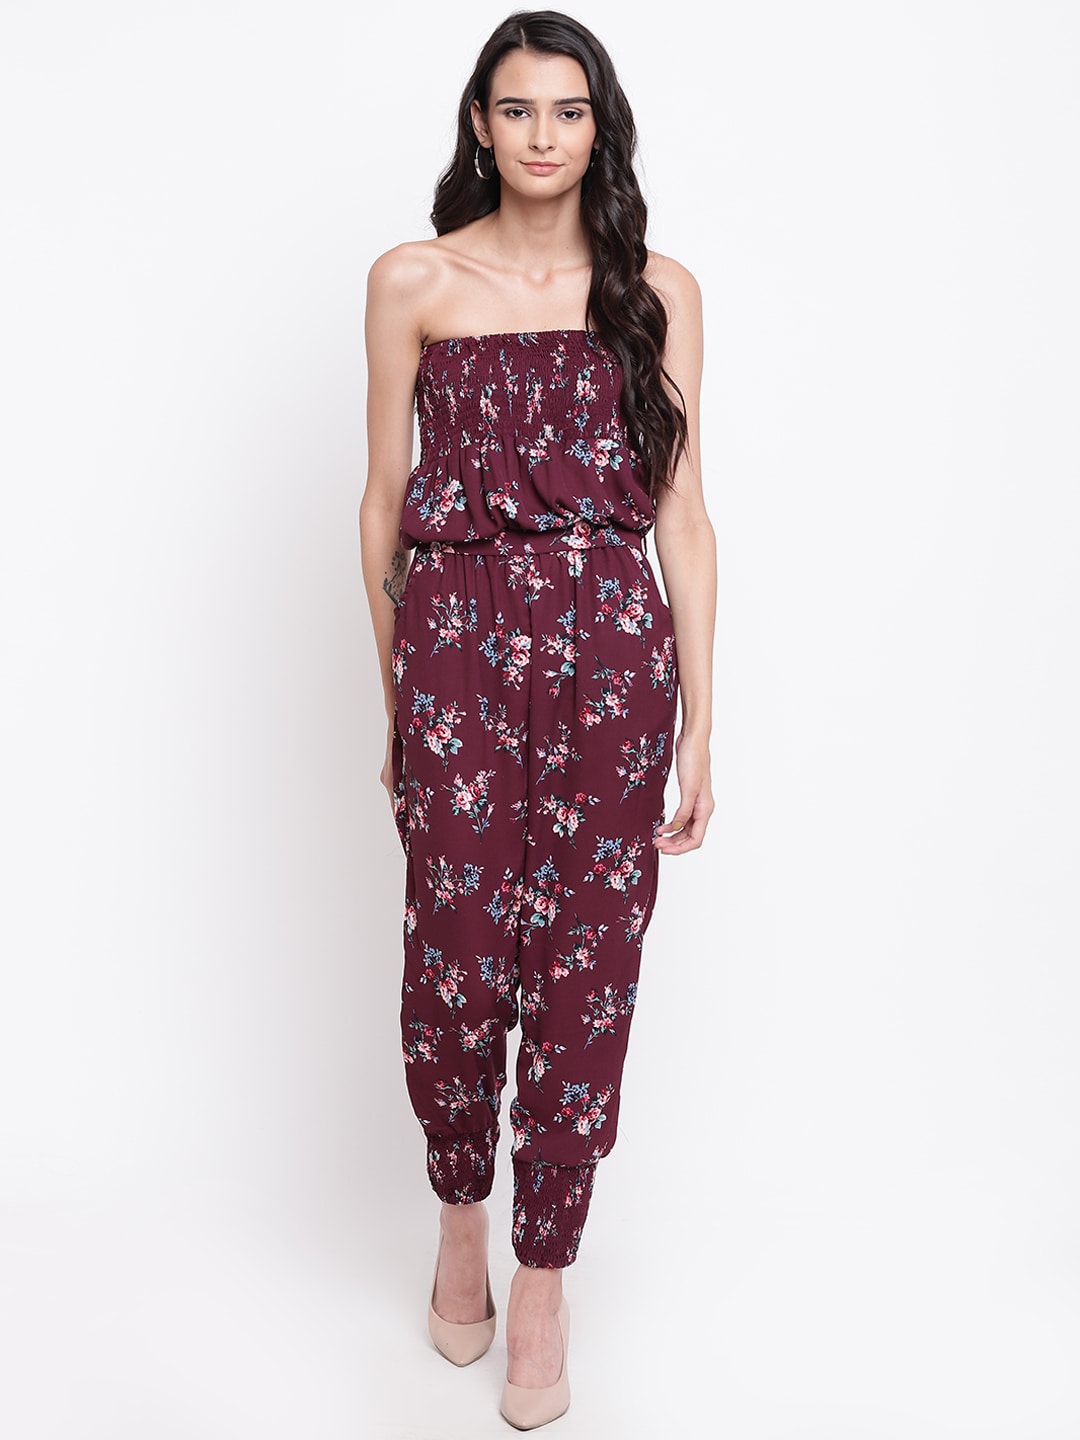 Belle Fille Burgundy & Pink Printed Strapless Basic Jumpsuit Price in India